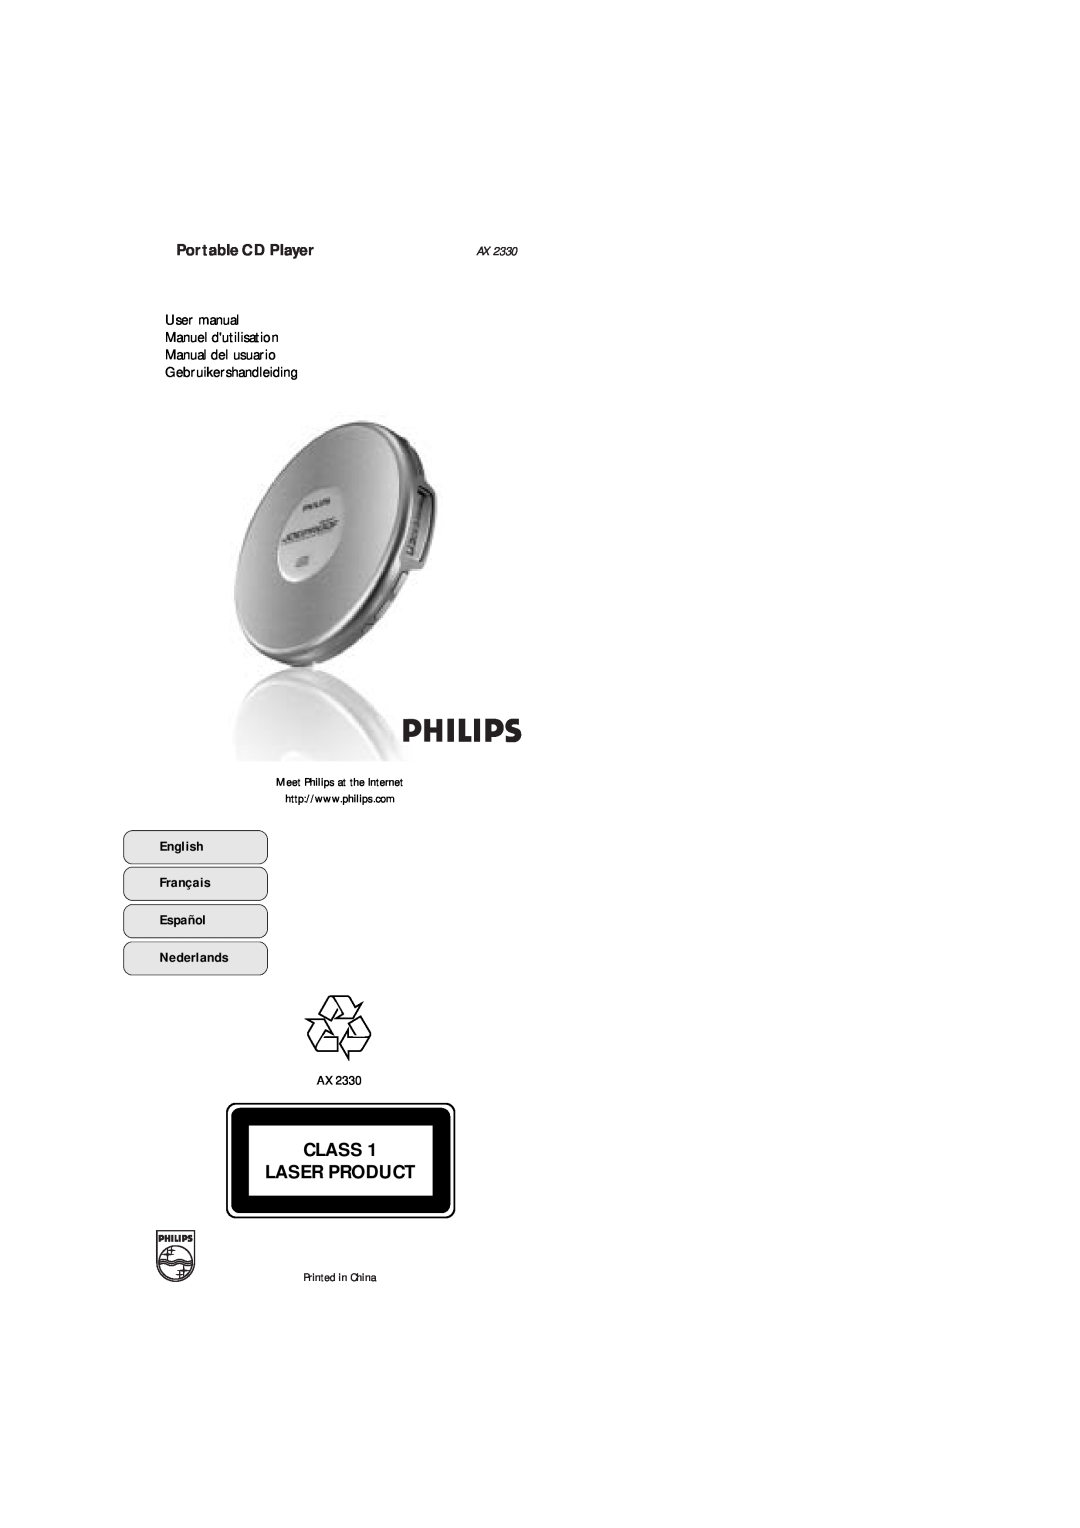 Philips AX 2330 user manual English Français Español Nederlands, Printed in China, Class Laser Product, Portable CD Player 